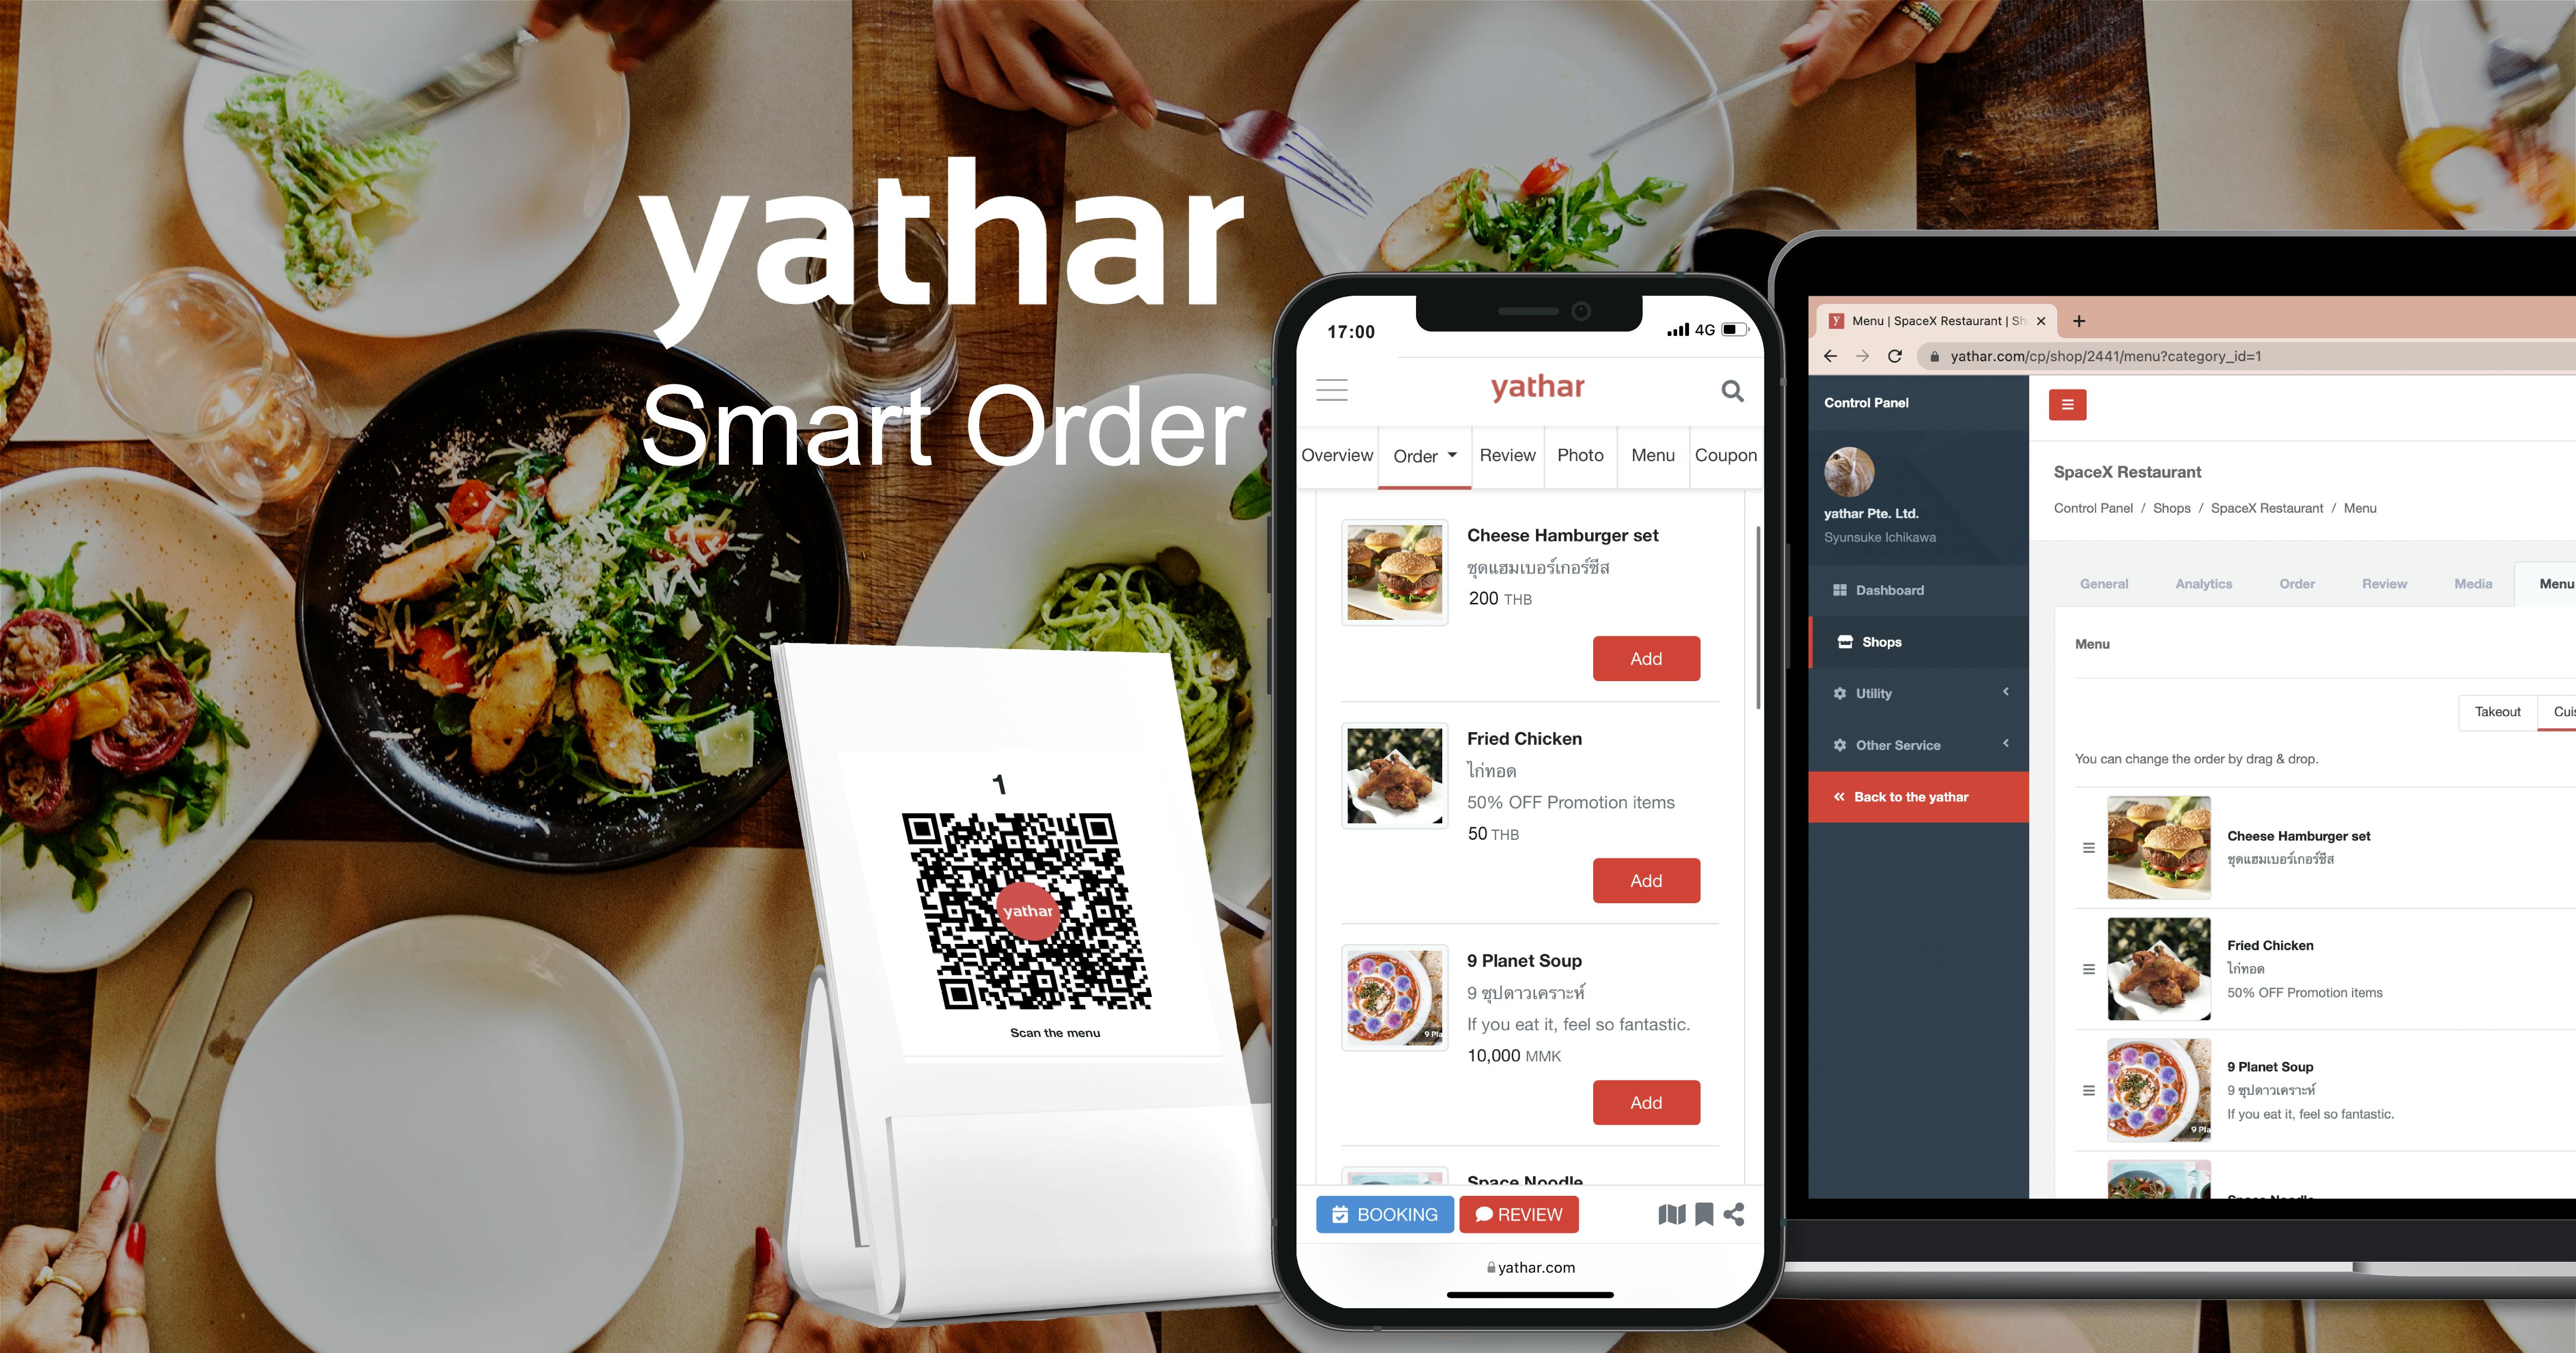 What is yathar Smart Order?